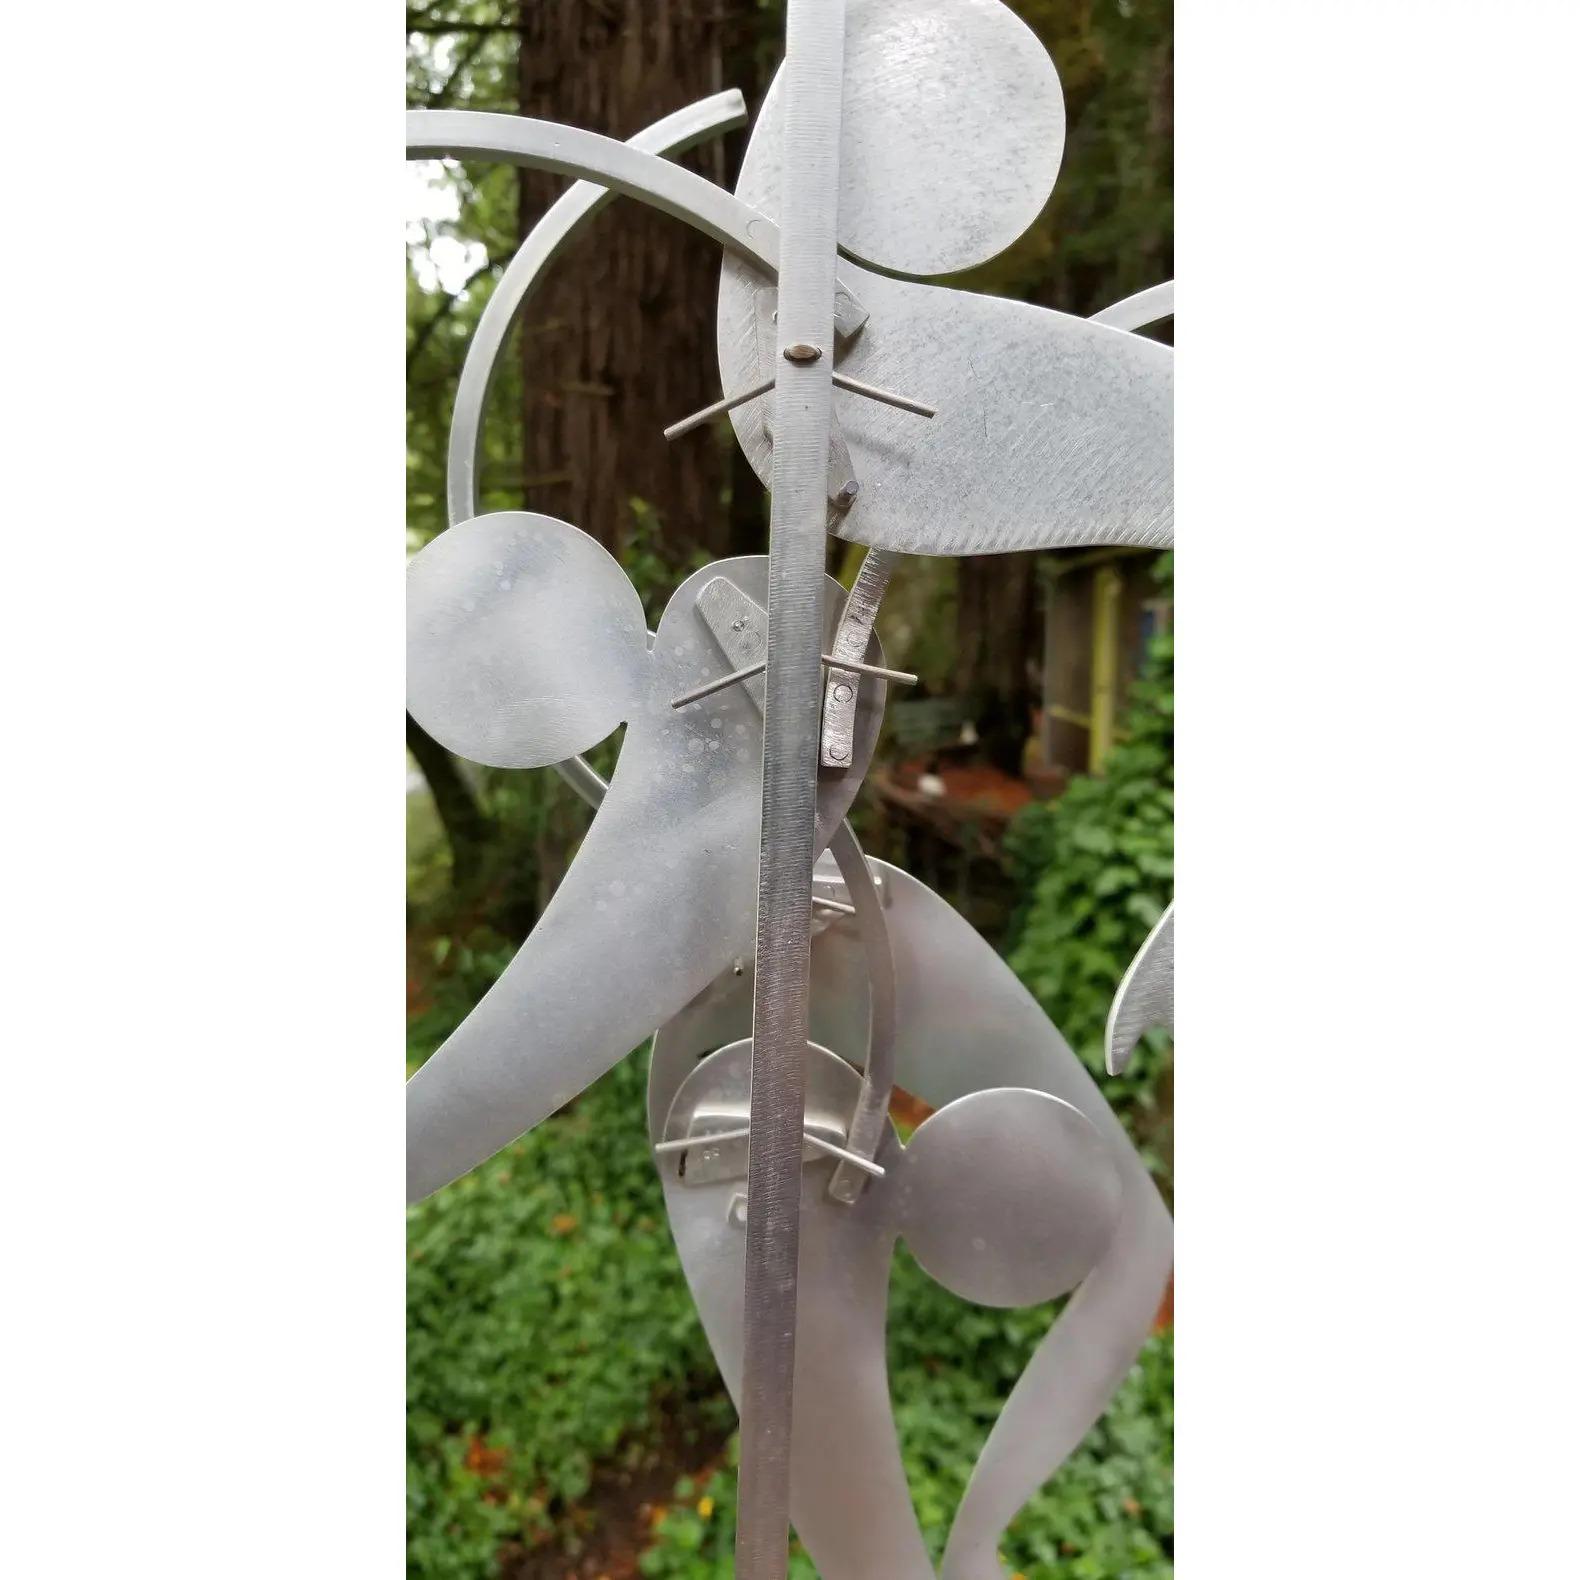 Kinetic Sculpture by Jerome Kirk In Good Condition For Sale In Fulton, CA